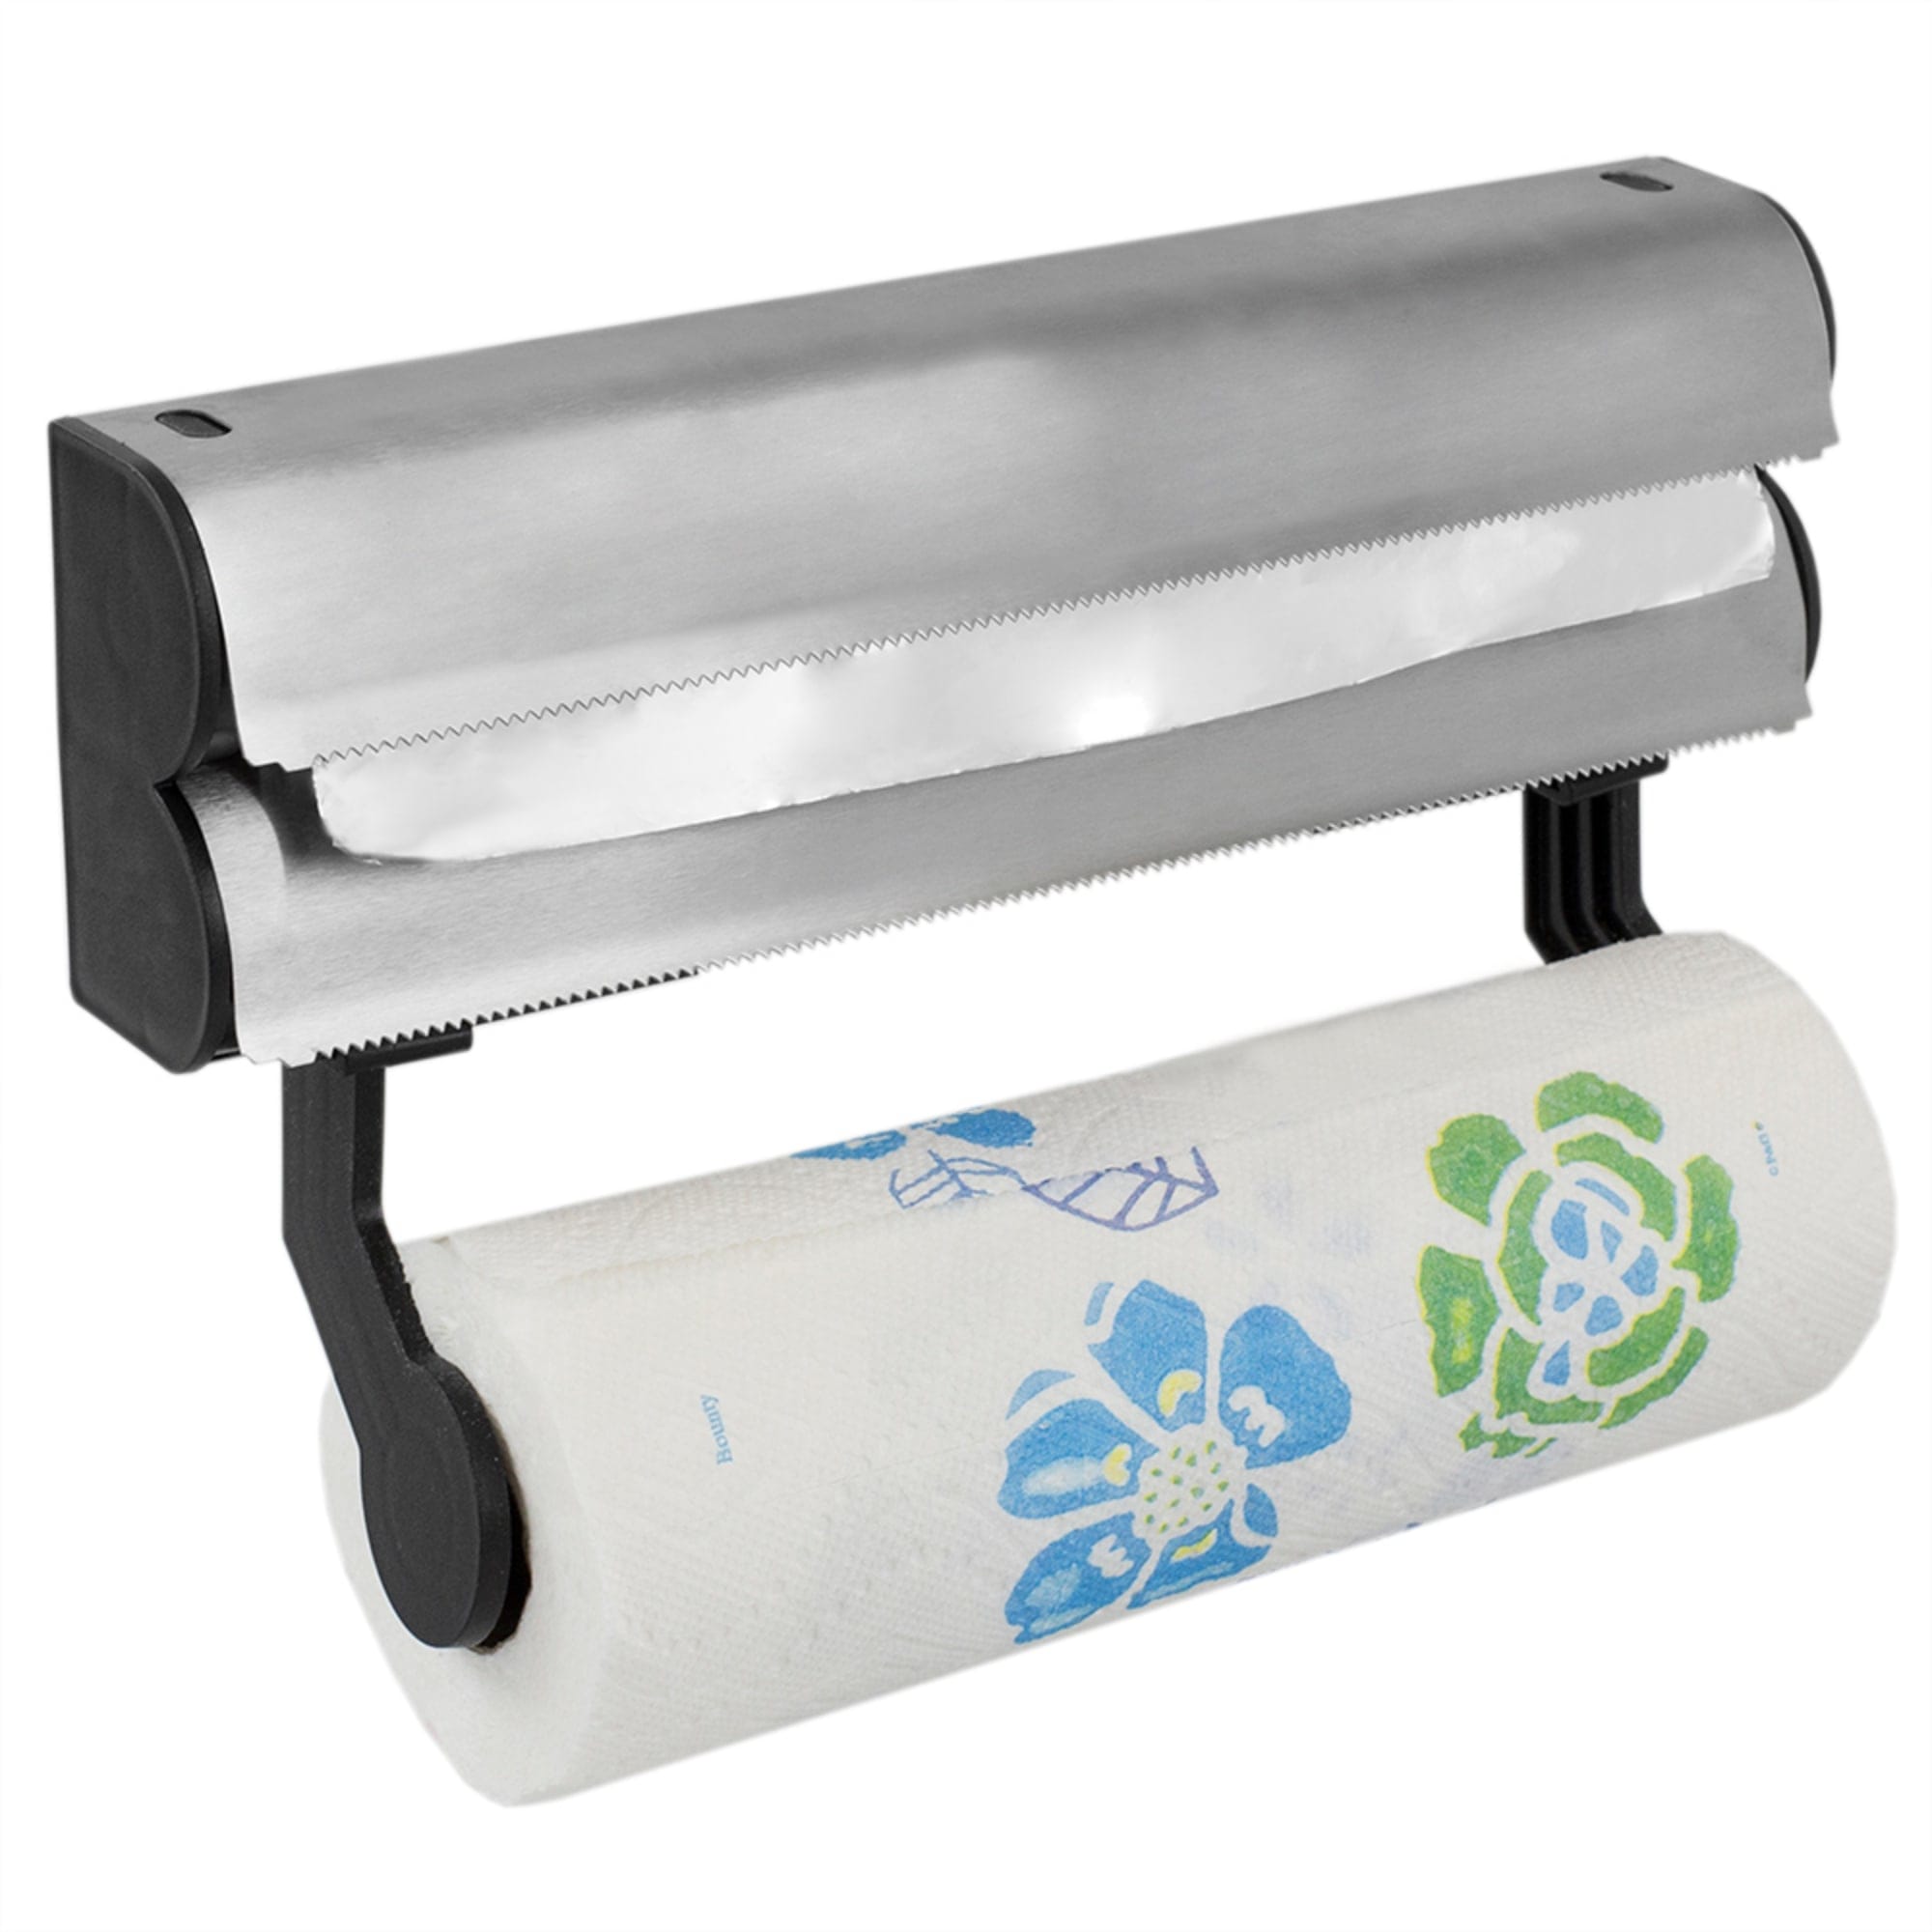 Home Basics Stainless Steel Paper Towel Holder with Integrated Wrap Dispenser $8.00 EACH, CASE PACK OF 12